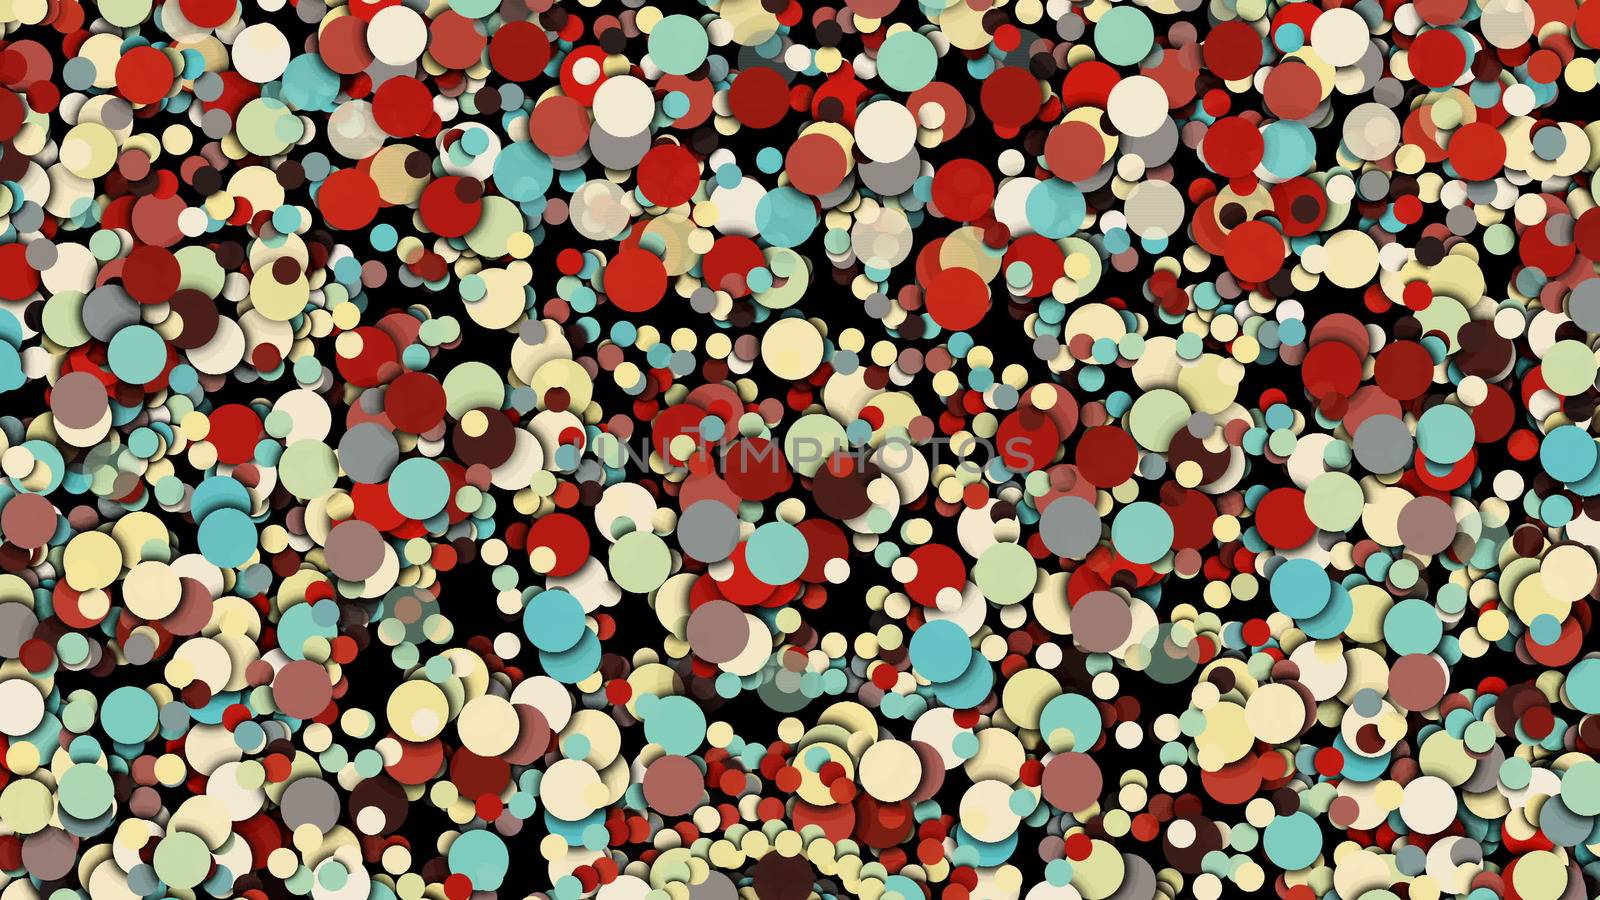 Many chaotic colorful circles, modern computer generated background, 3D rendering